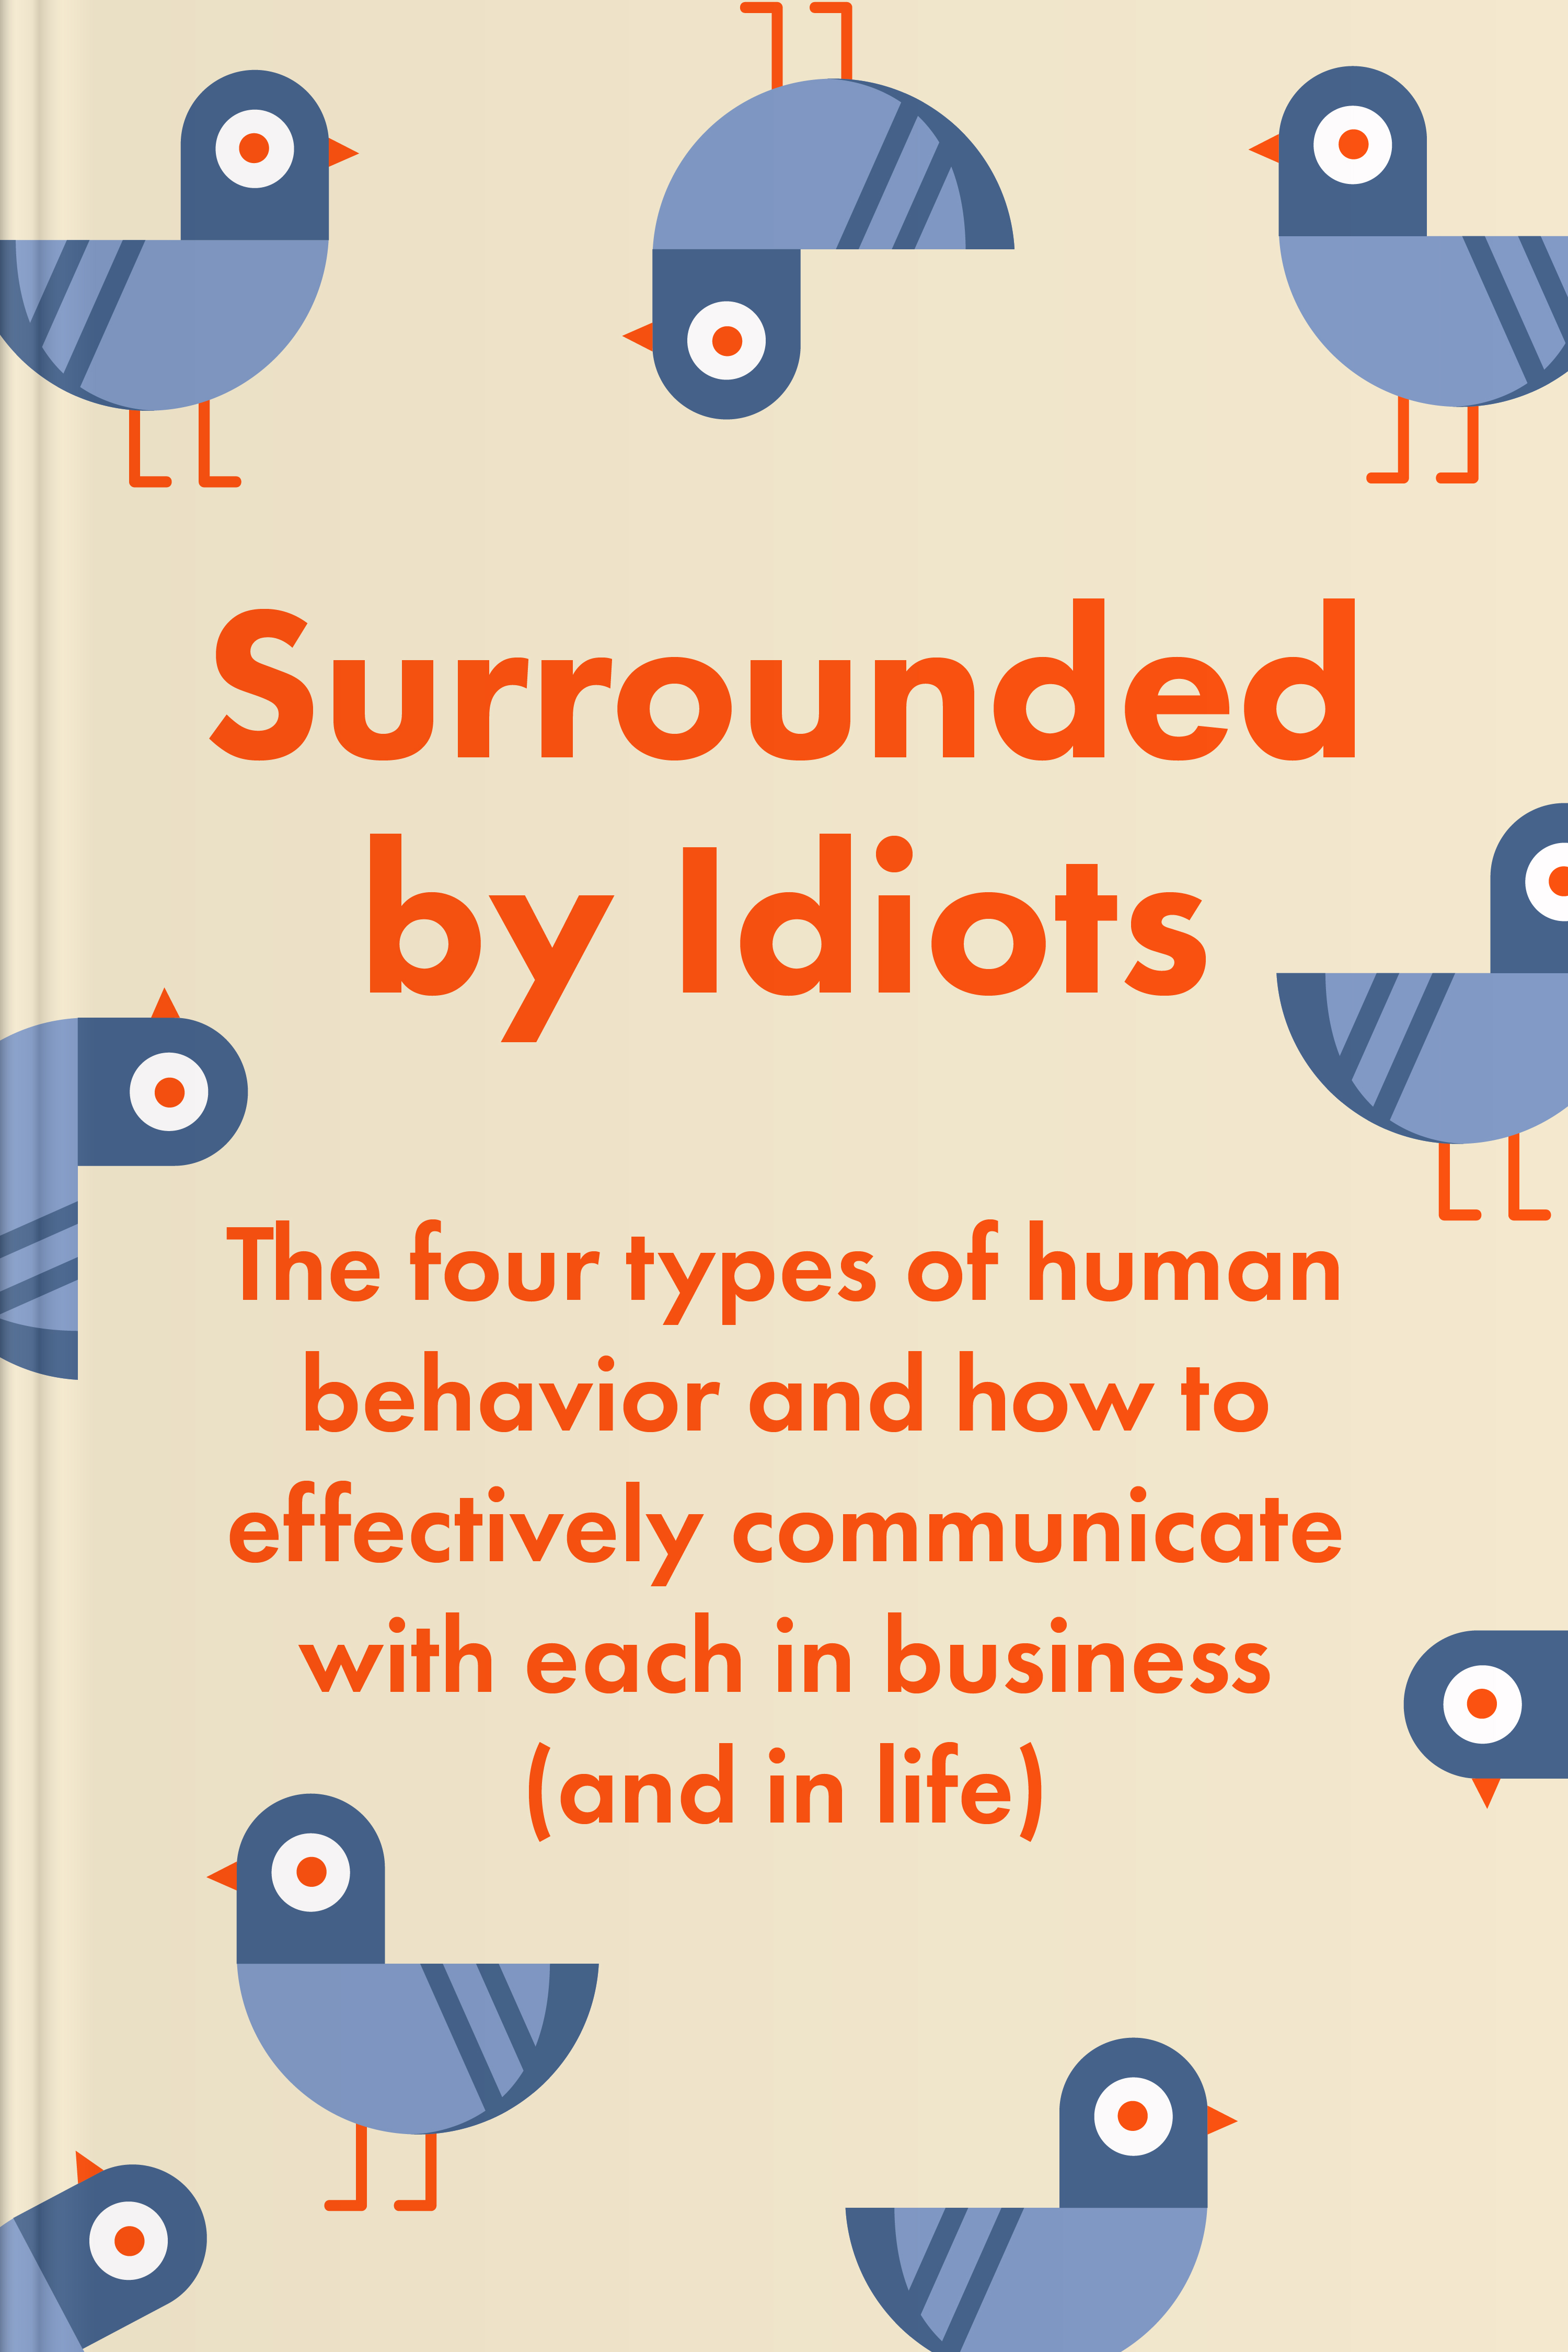 Surrounded by Idiots by Thomas Erikson - Summary